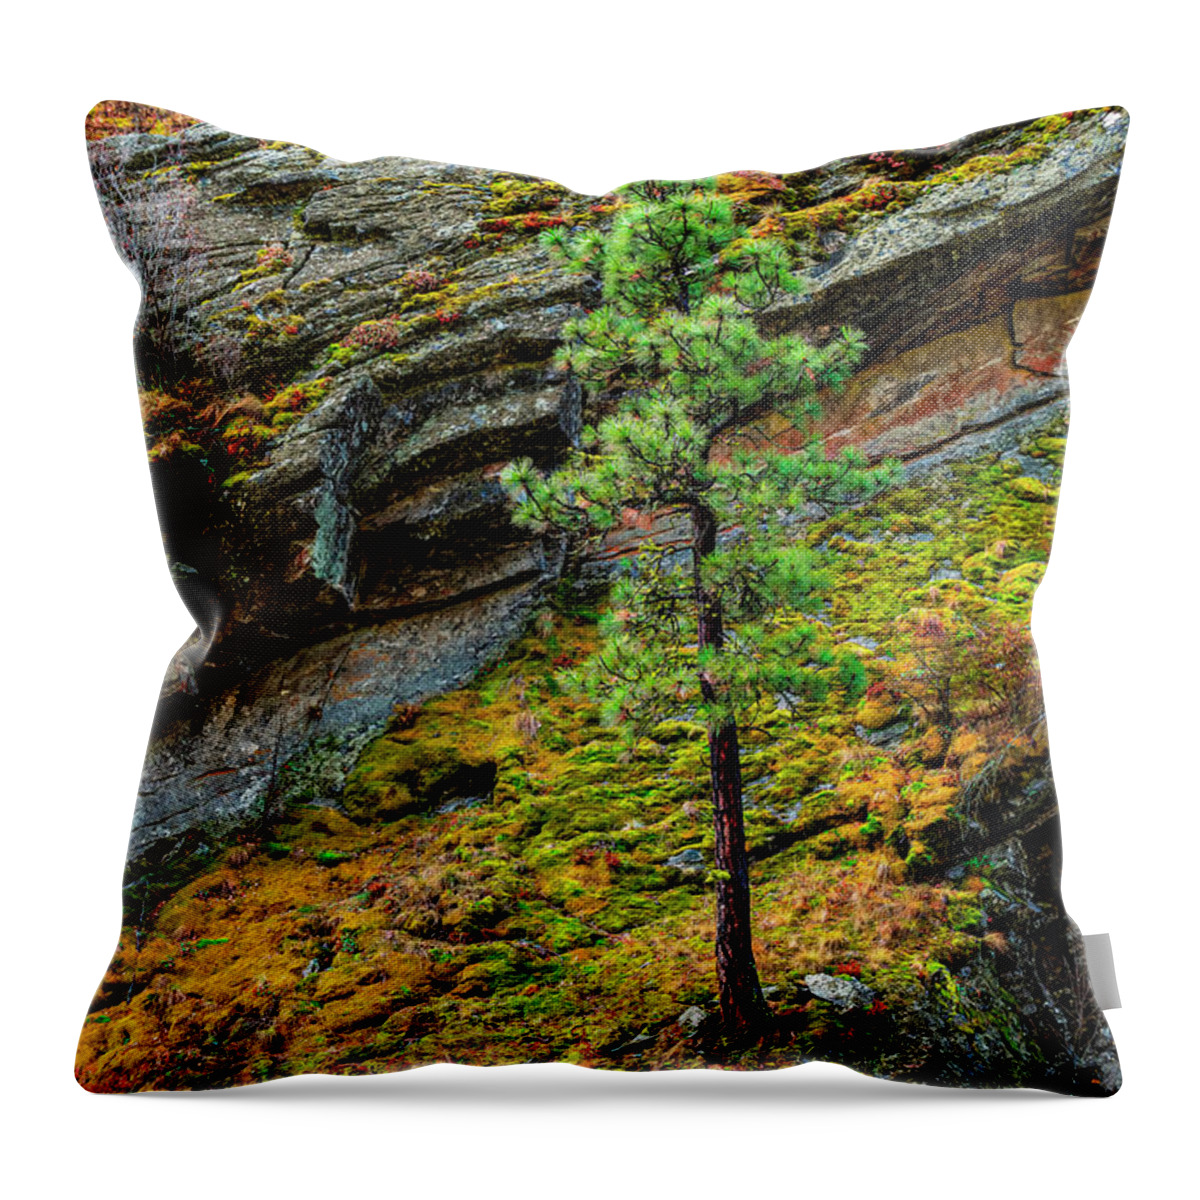 Landscape Throw Pillow featuring the photograph A Firm Foundation by Pamela Dunn-Parrish